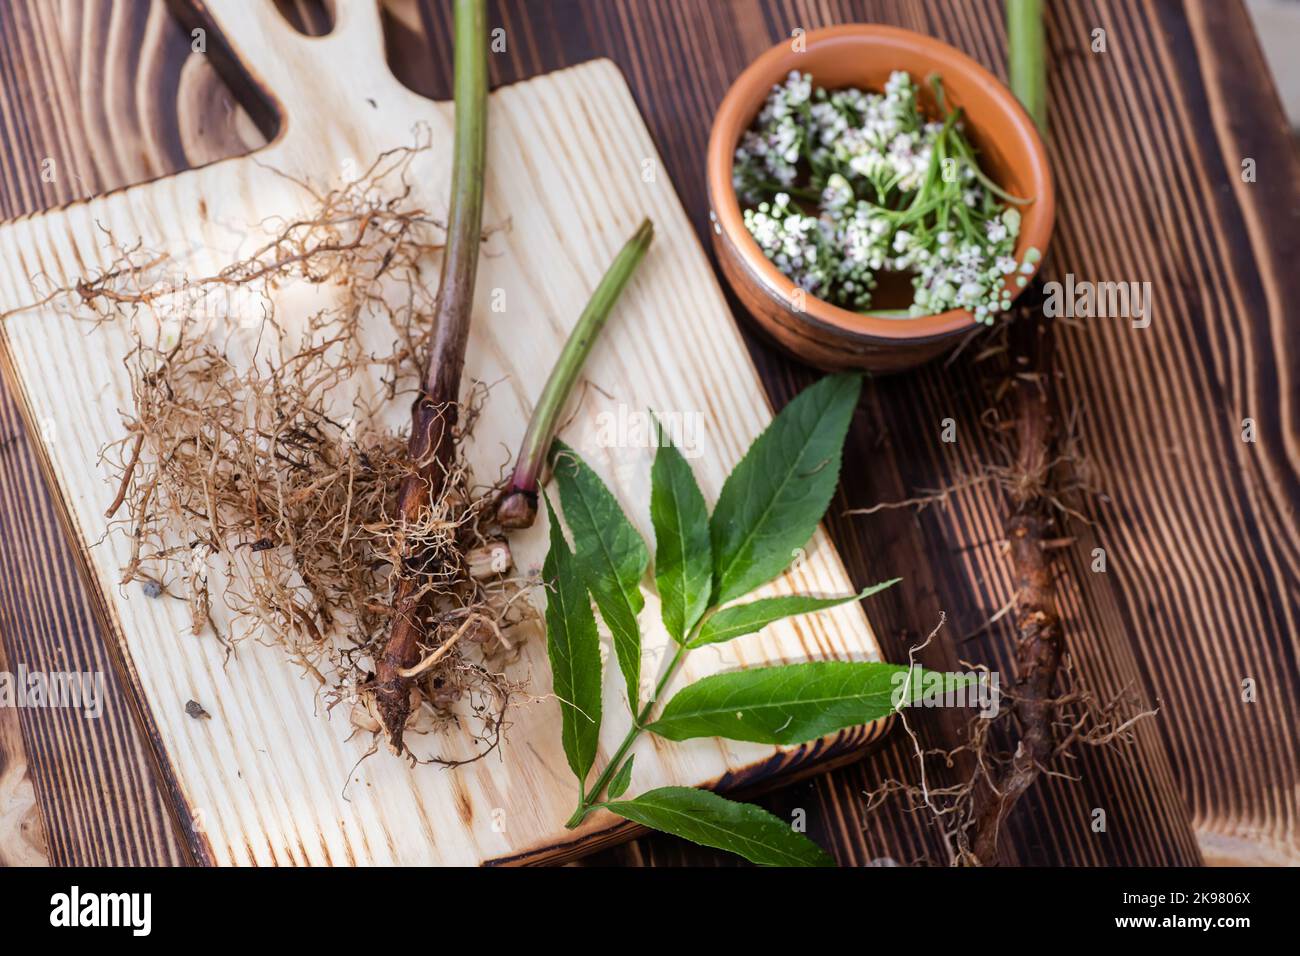 Valeriana roots, leaves and flowers. Collection and harvesting of plant parts for use in traditional and alternative medicine as a sedative and tranqu Stock Photo